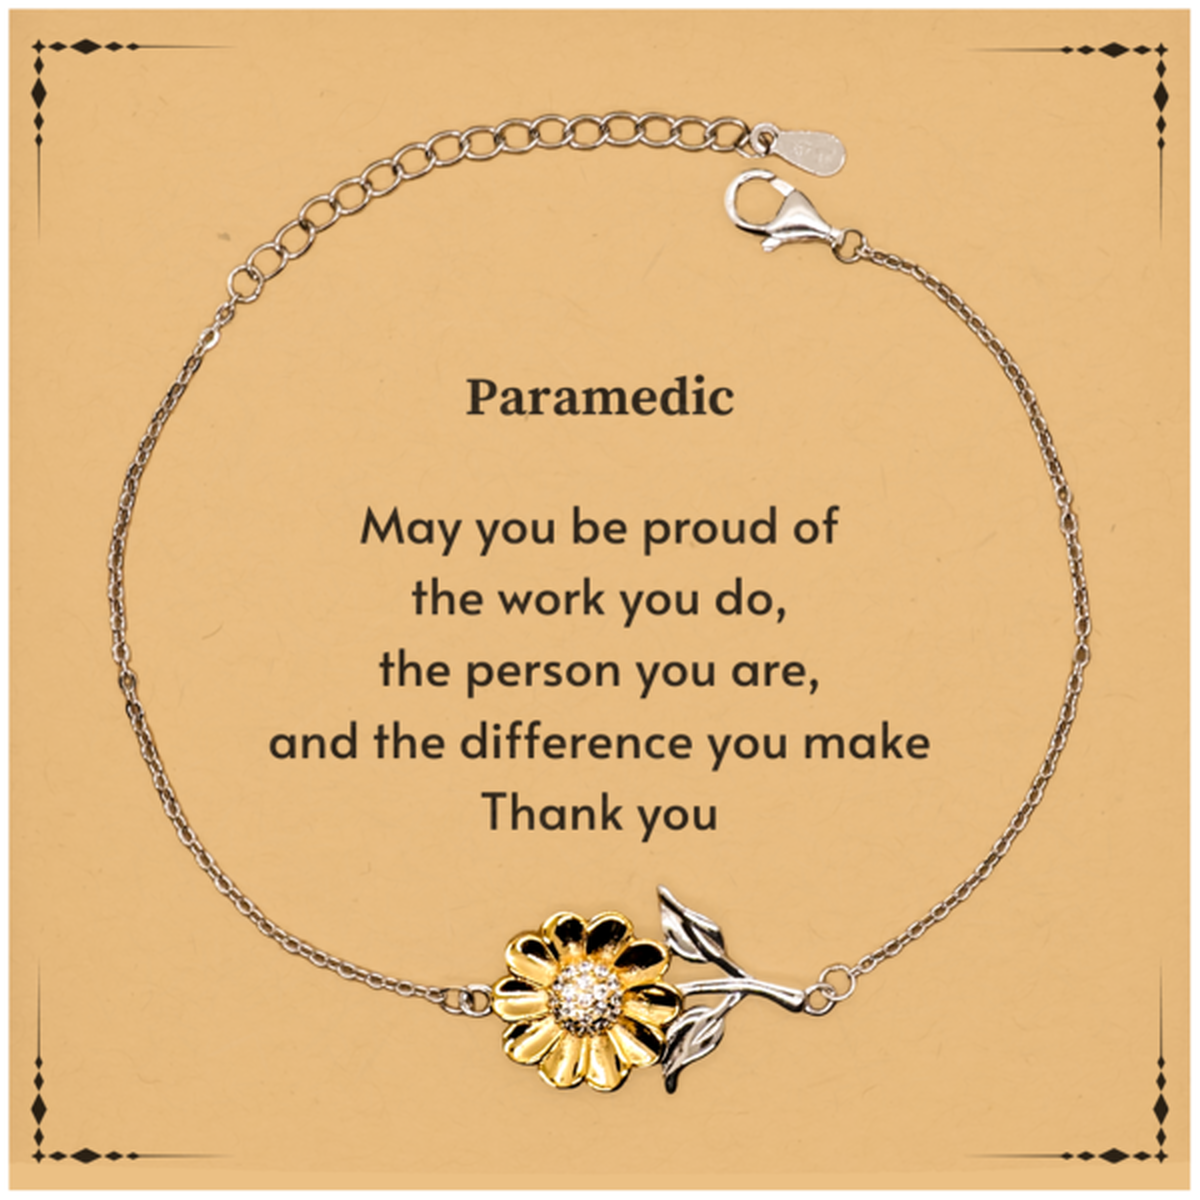 Heartwarming Sunflower Bracelet Retirement Coworkers Gifts for Paramedic, Paramedic May You be proud of the work you do, the person you are Gifts for Boss Men Women Friends